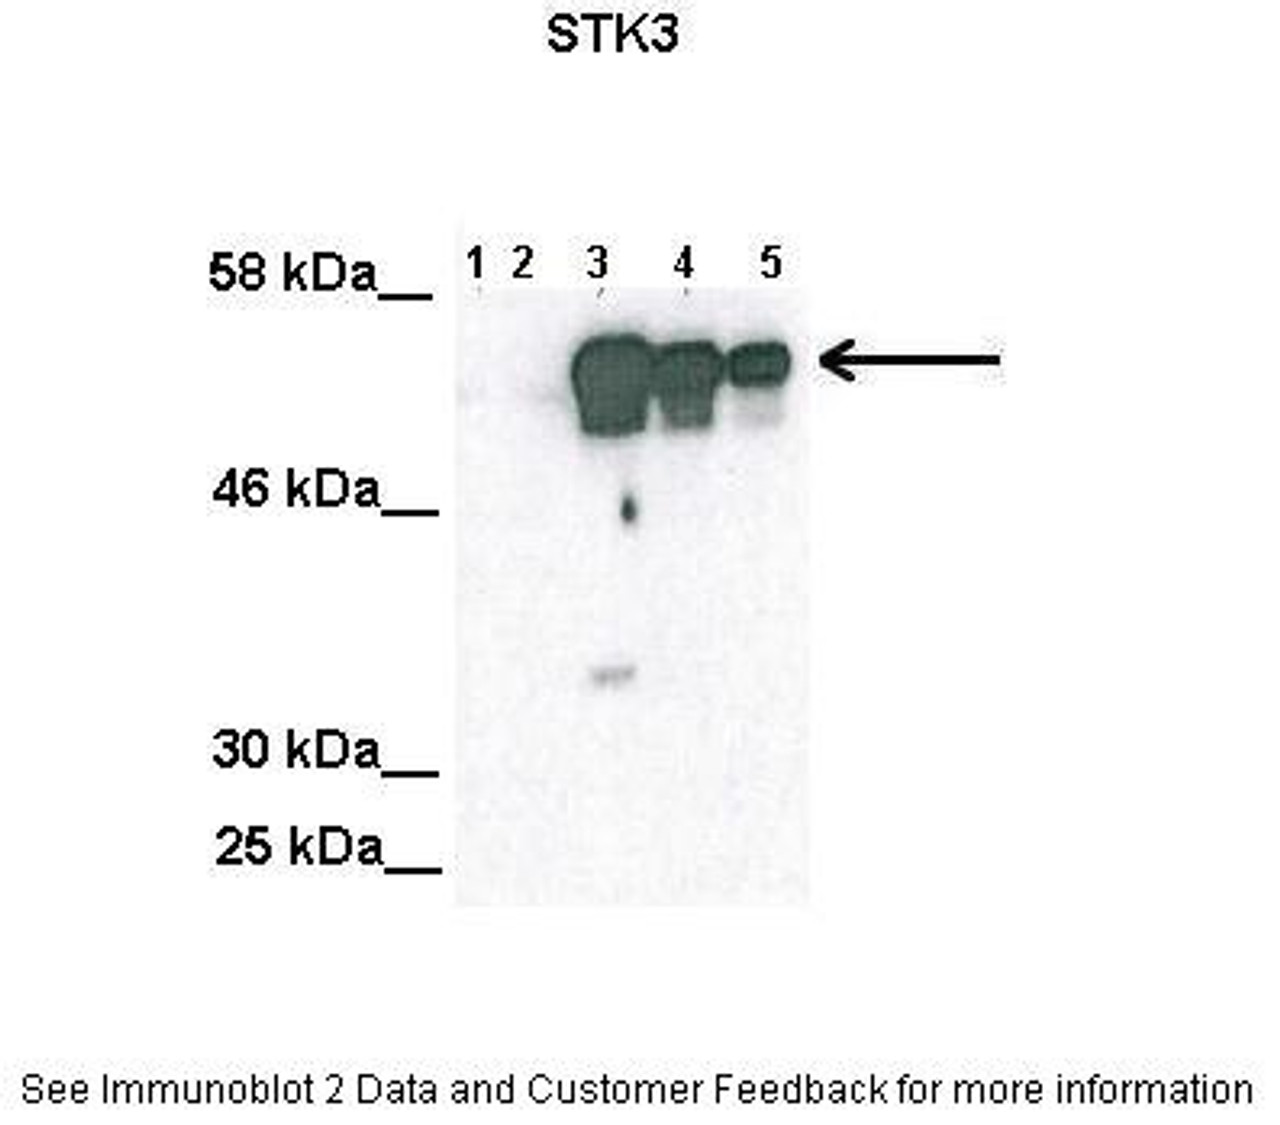 Antibody used in WB on transfected Cos-7 at: 1:2000 (Lane1: 100ug untransfected COS-7 lysate, Lane2: 100ug mock transfected Cos-7 lysate, Lane3: 100ug STK3 transfected Cos-7 lysate, Lane4: 50 ug STK3 transfected Cos-7 lysate, Lane5: 25 ug STK3 transfected Cos-7 lysate) .